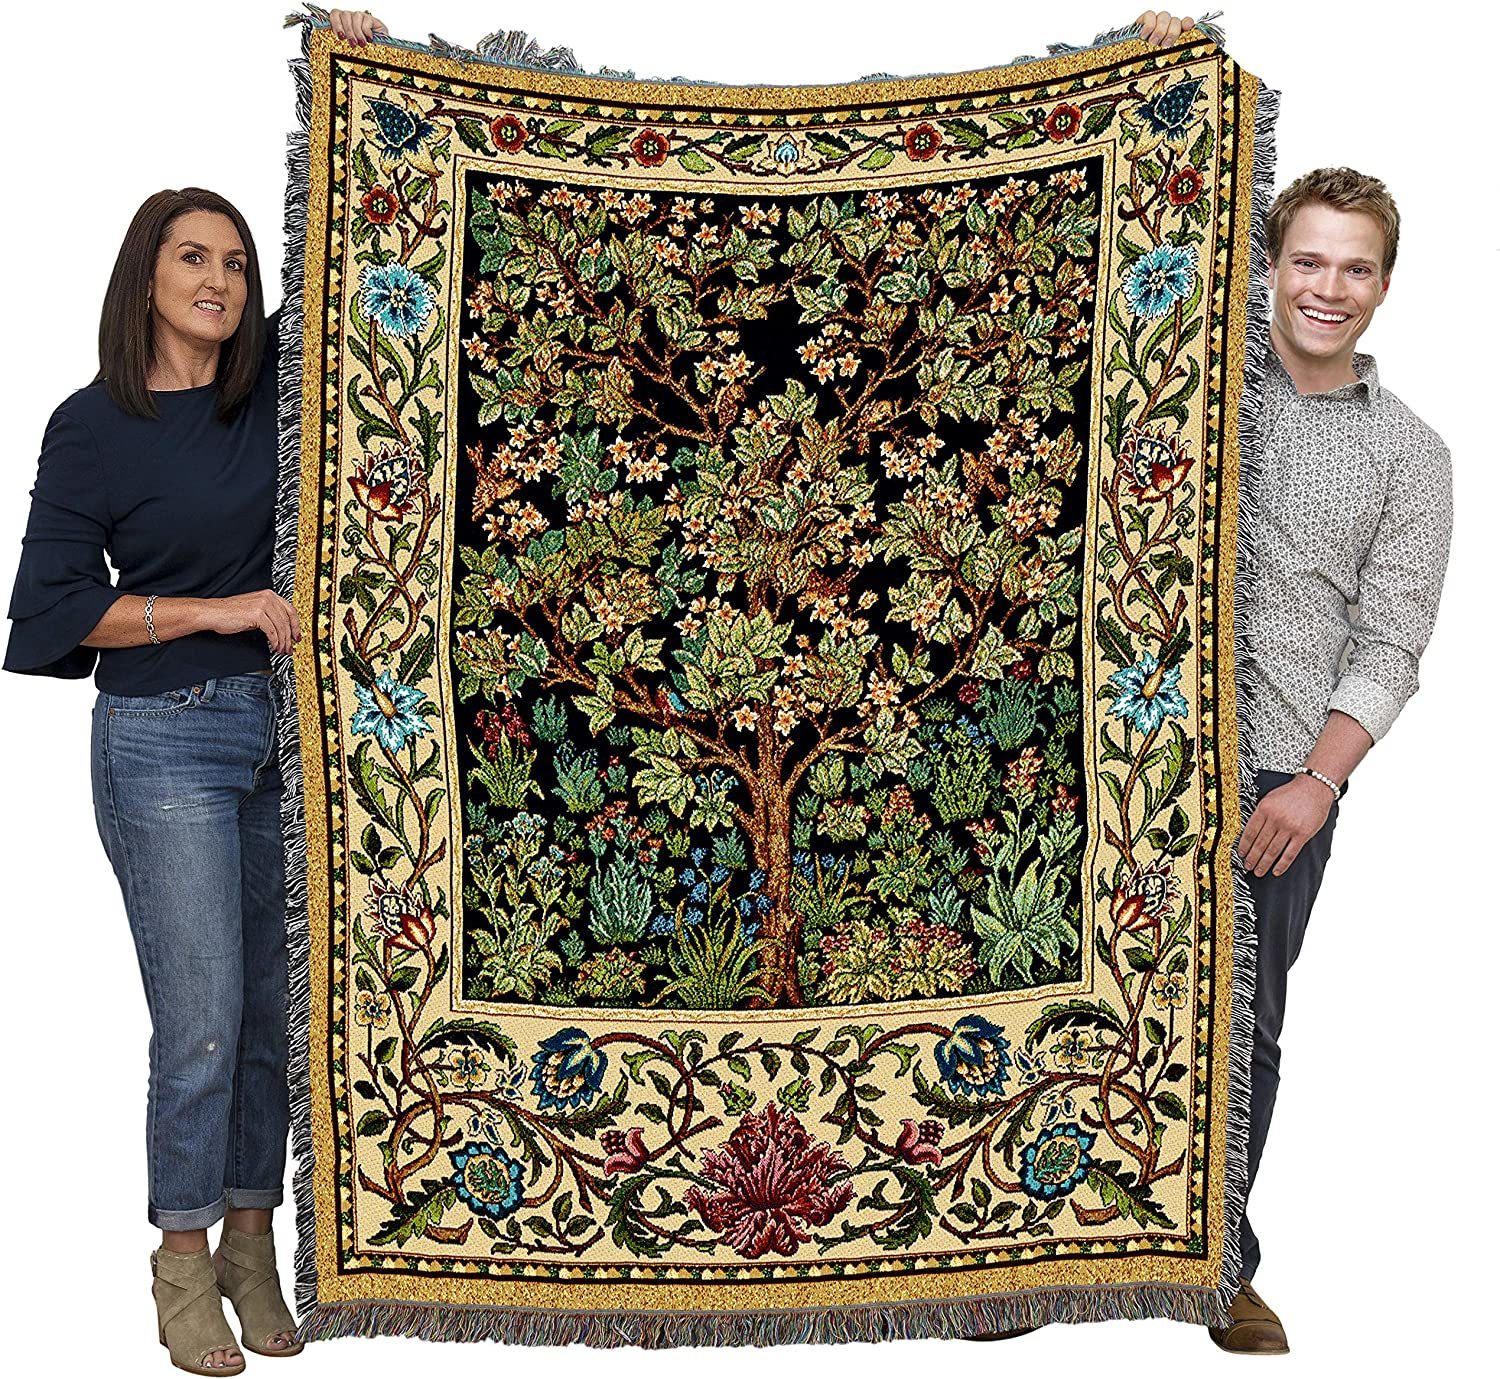 Primary image for William Morris Tree of Life Blanket - Arts & Crafts - Gift Tapestry Throw, 72x54